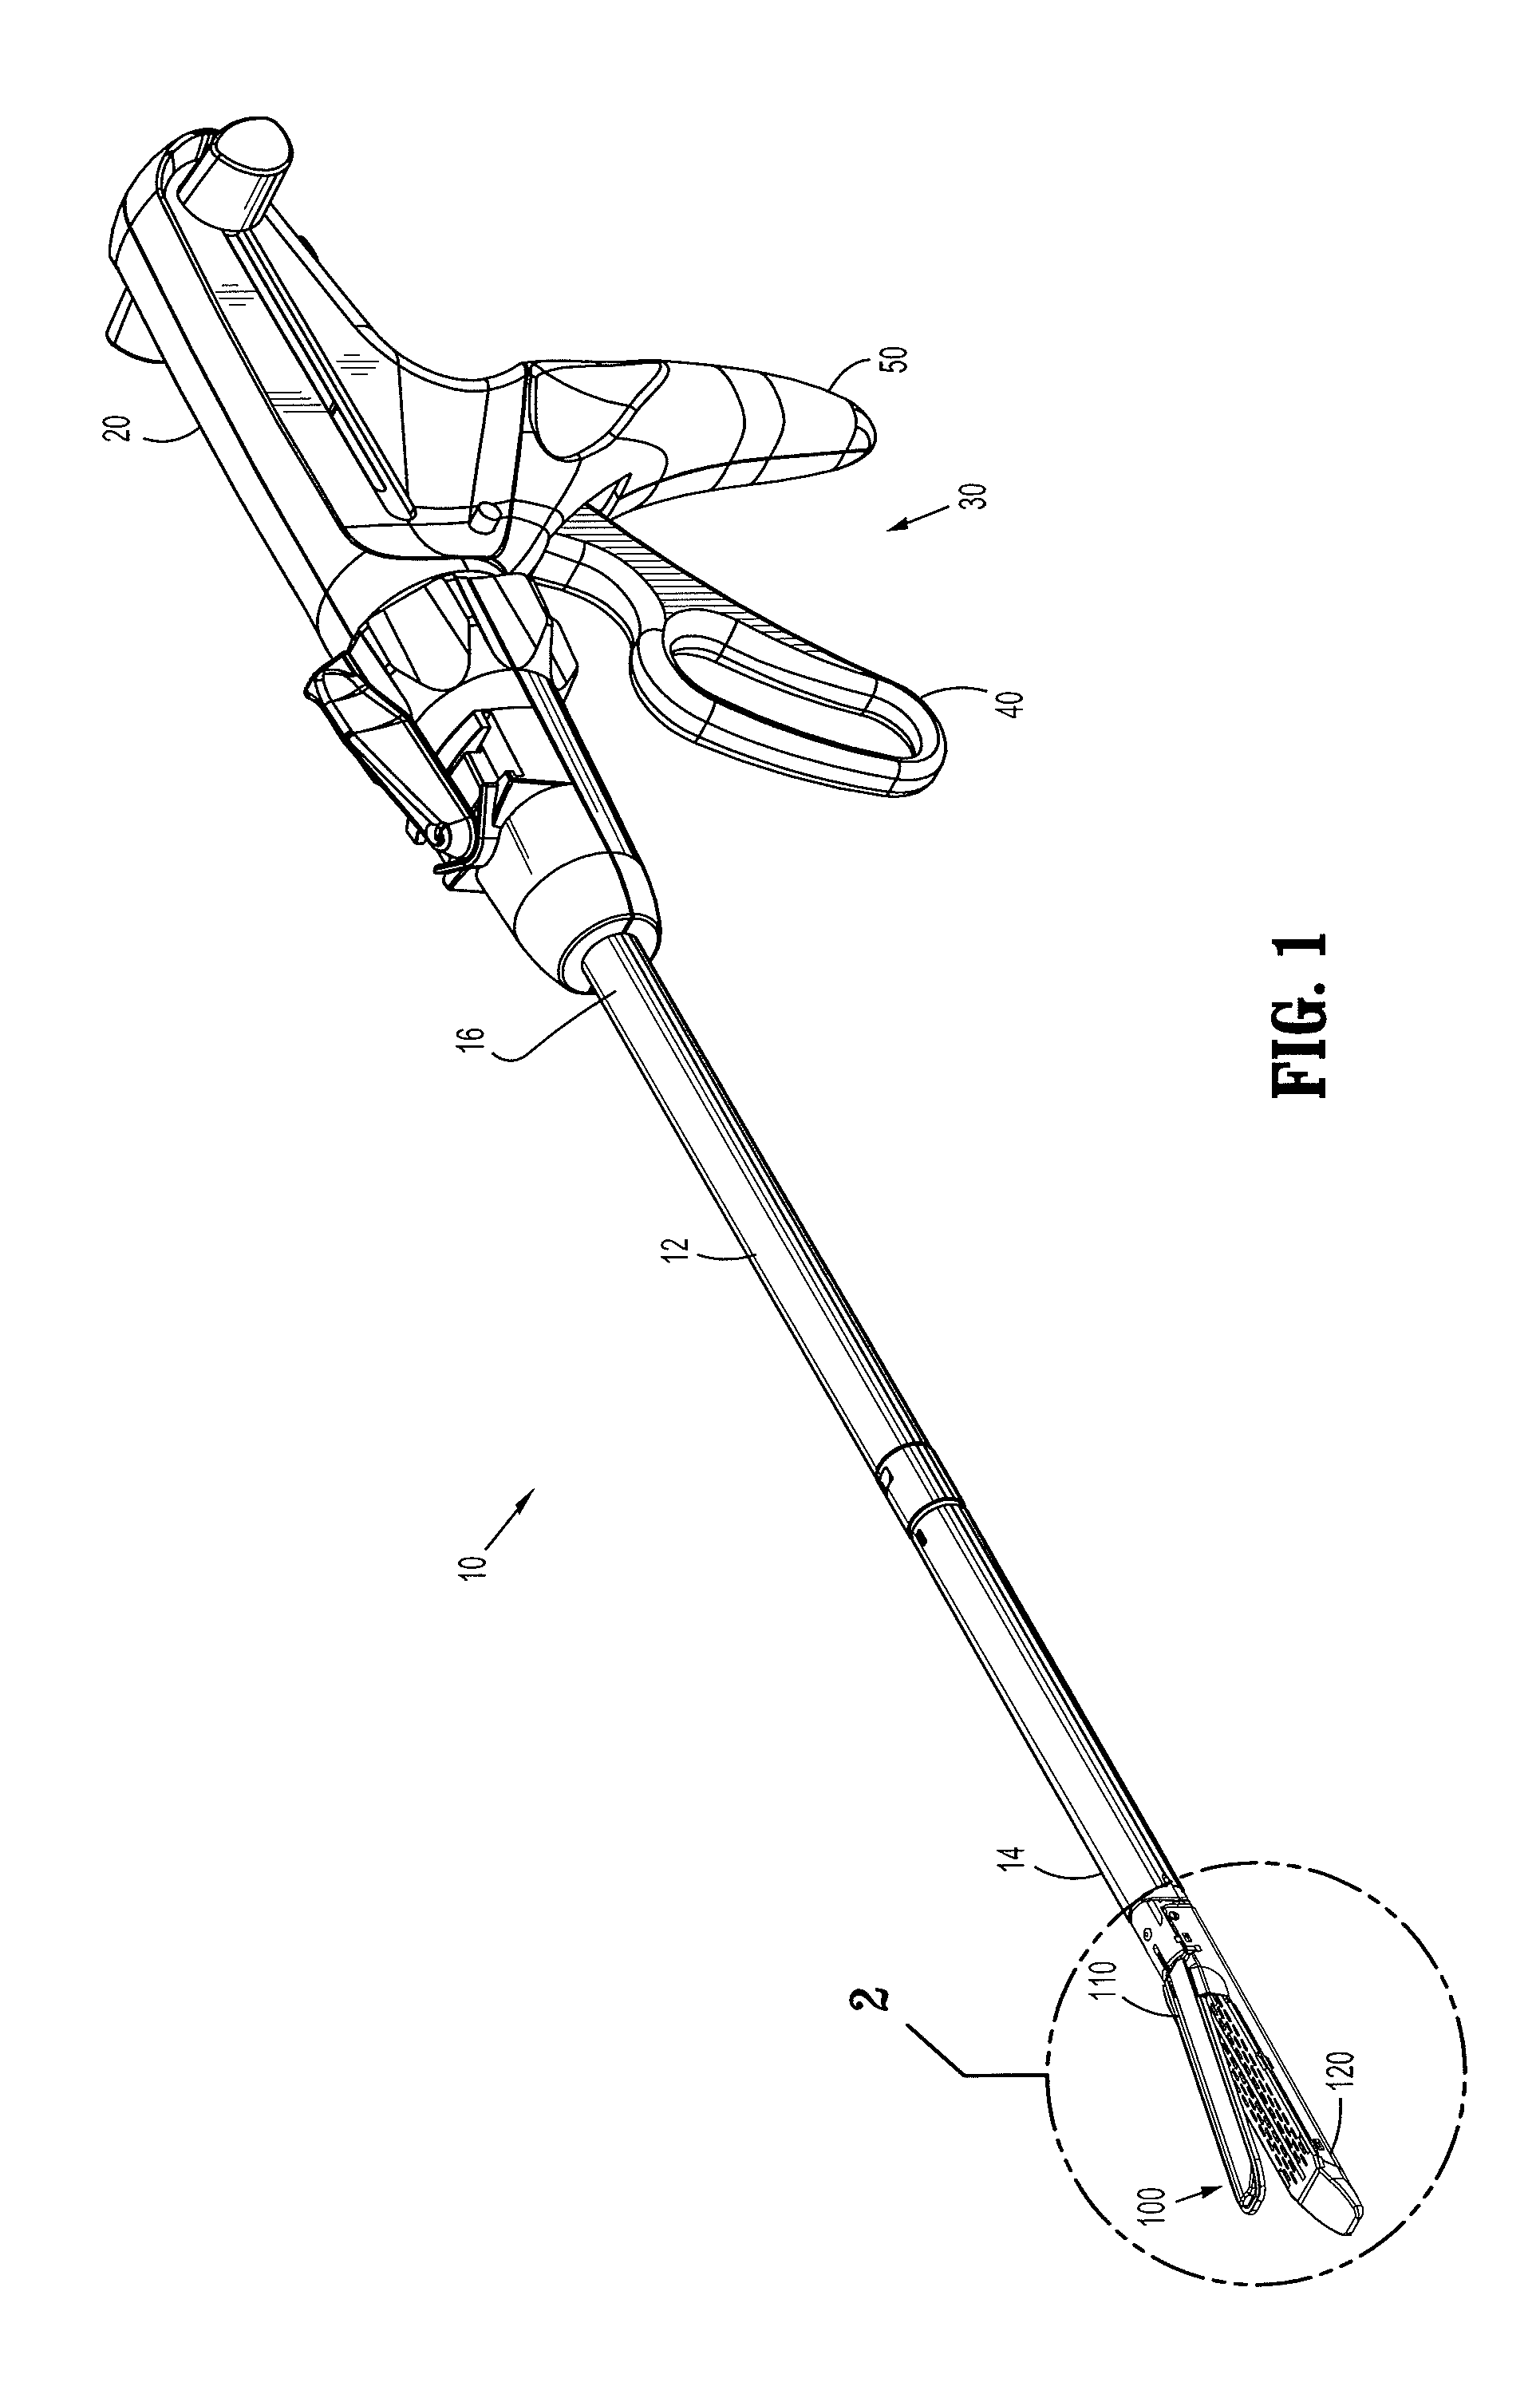 Tissue fastening system for a medical device